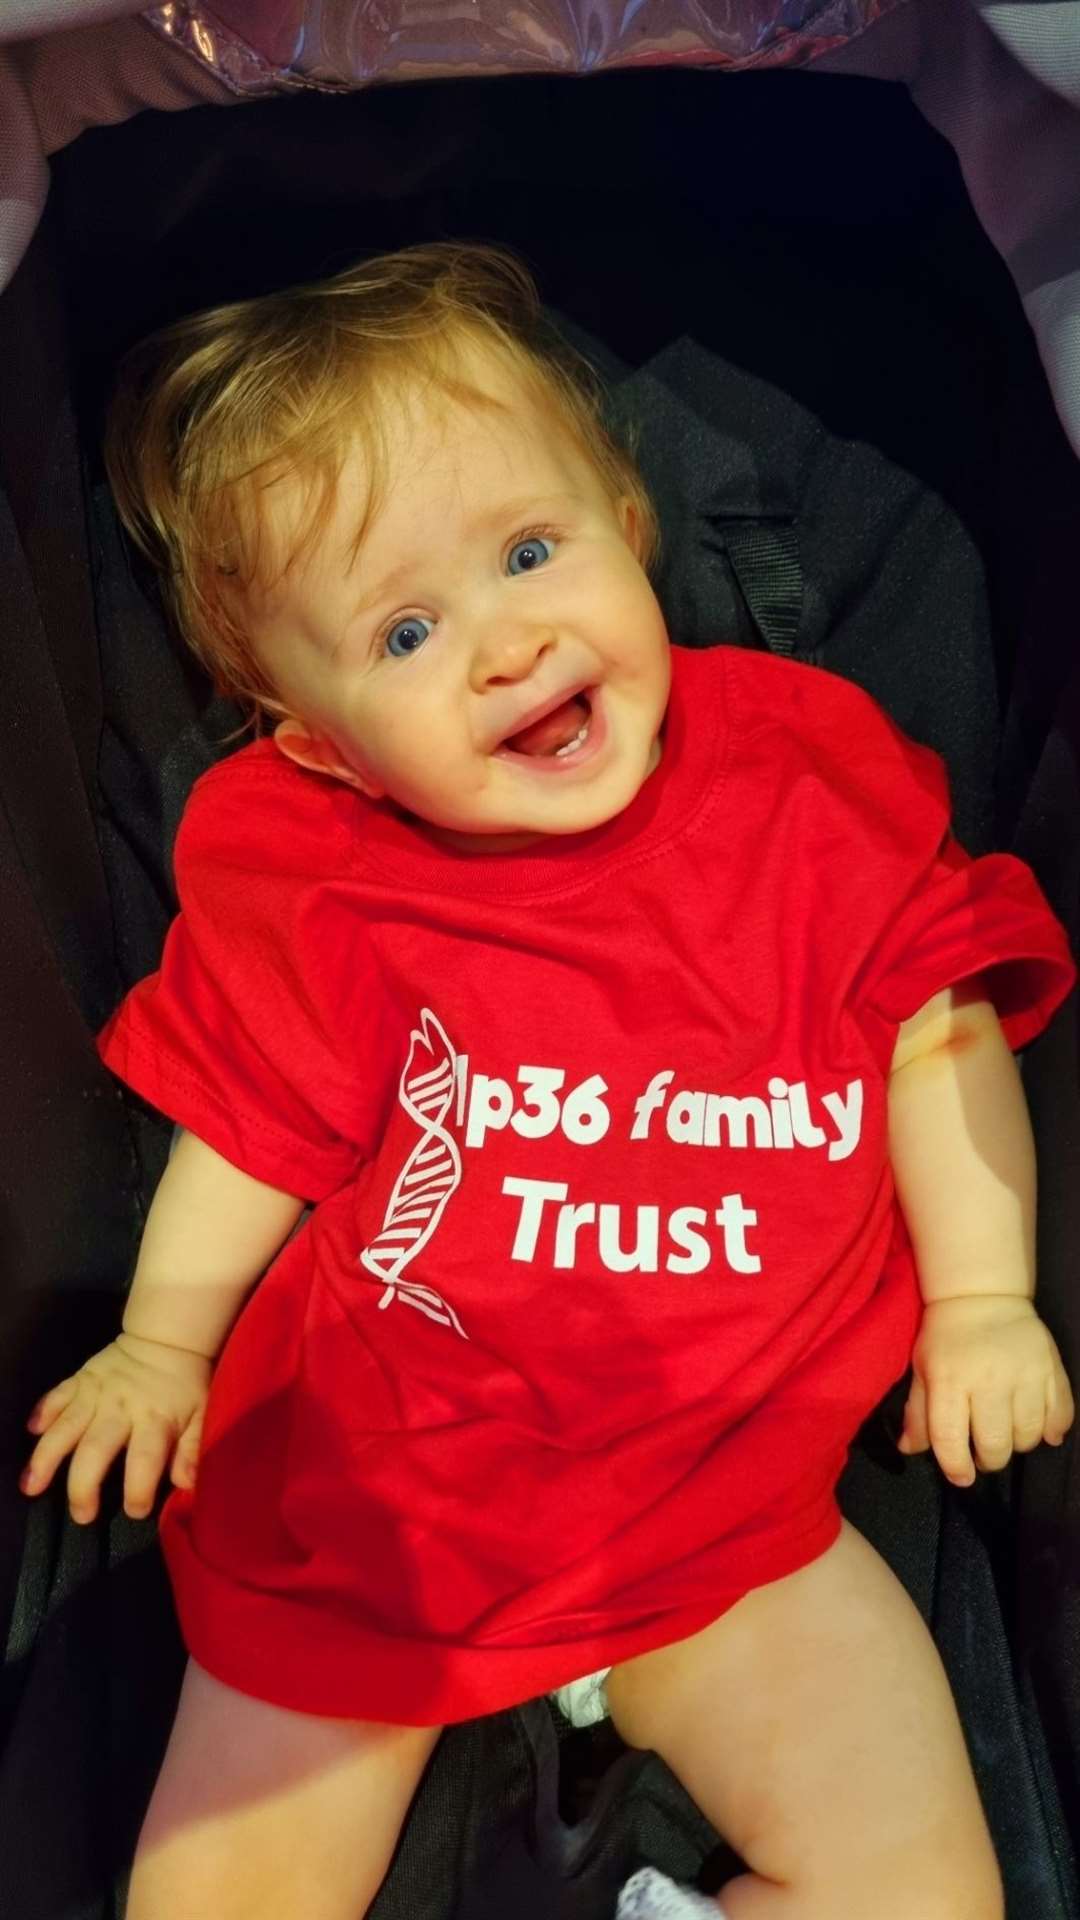 Rosie has a rare genetic condition called 1p36